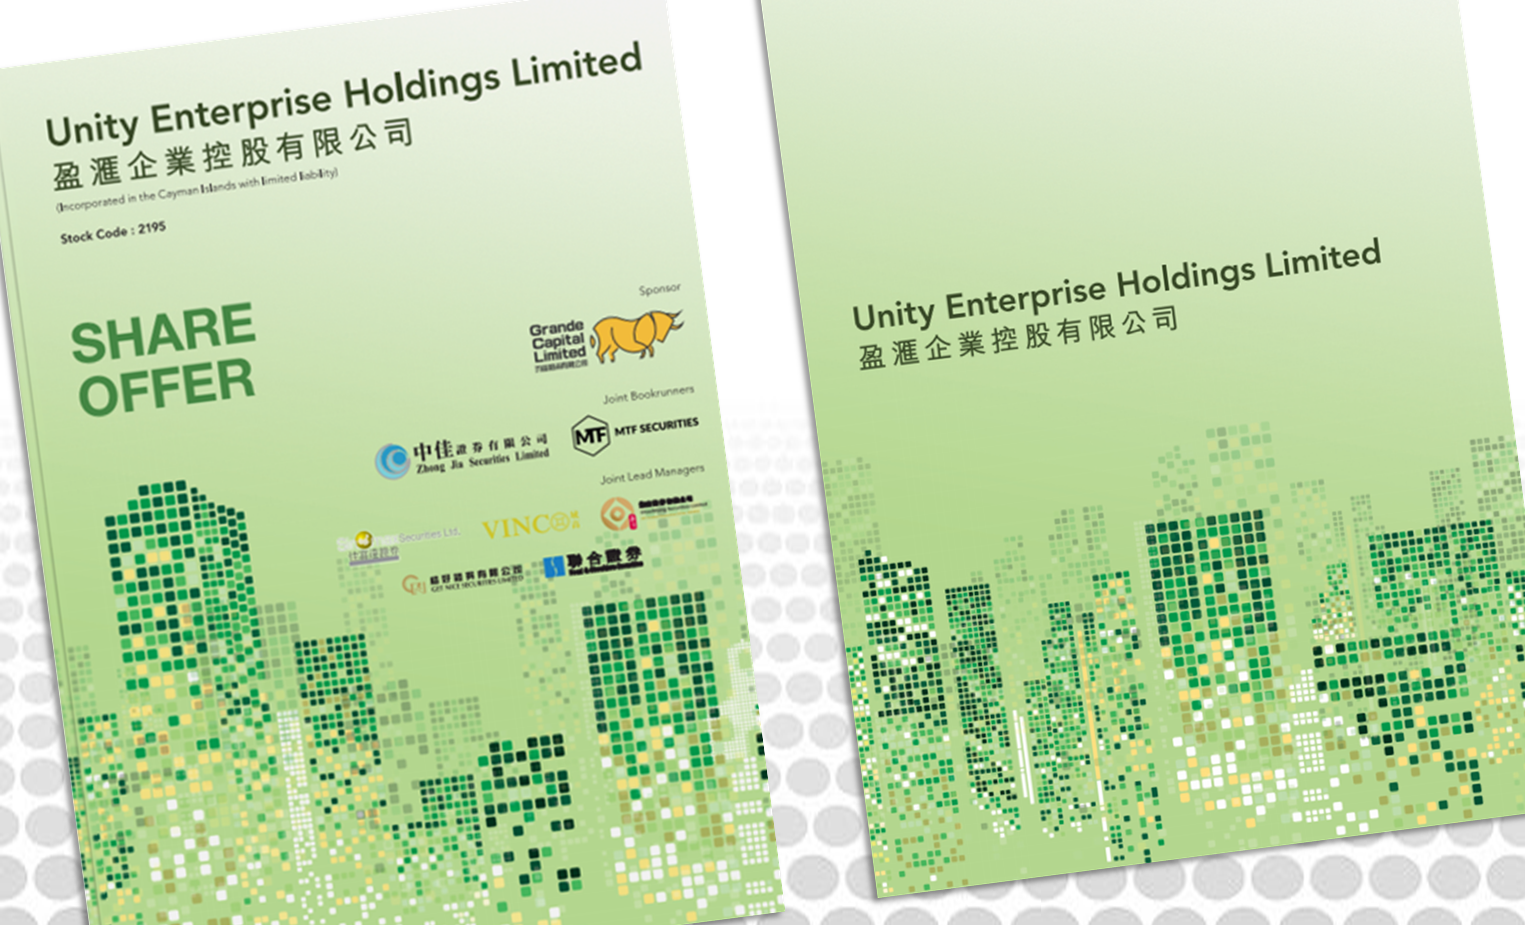 IPO Lawyers of ONC Lawyers advised on the listing of Unity Enterprise Holdings Limited